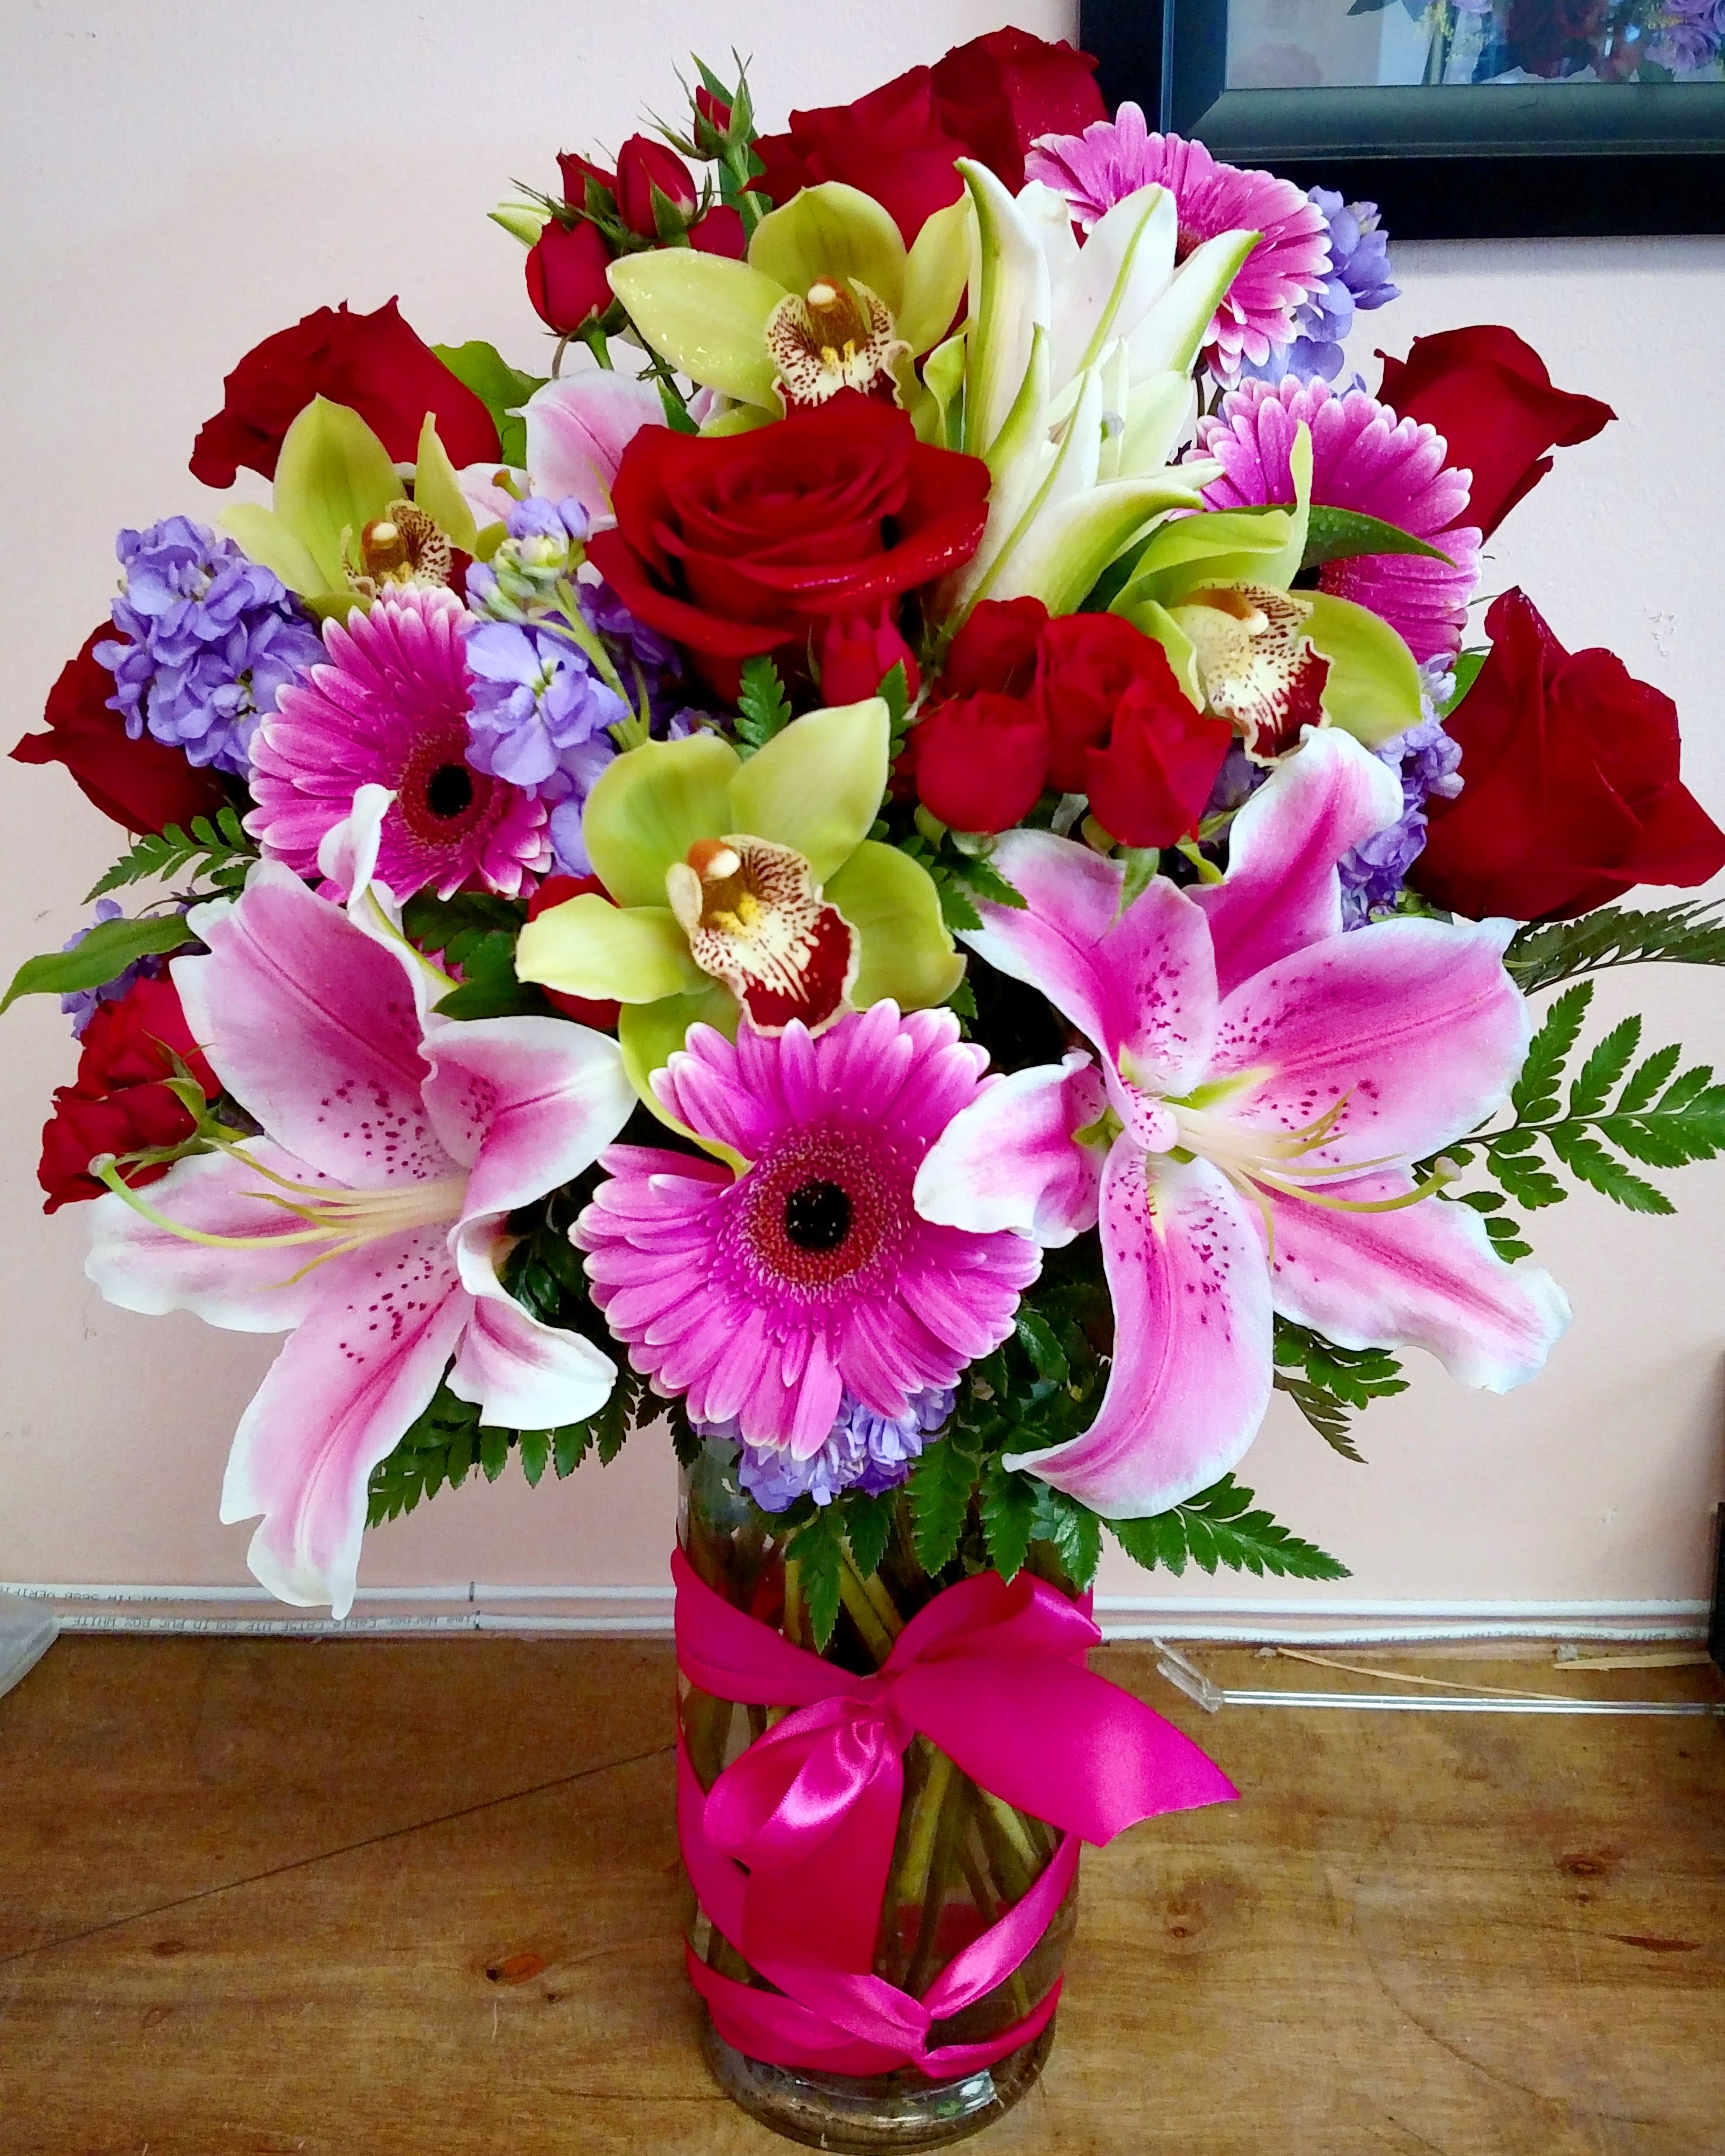 Cymbidium Rose Bouquet  - Green cymbidium orchids, pink gerbera daisies, large red roses and baby roses next to perfectly Bloomed pink lilies in a one sided design.